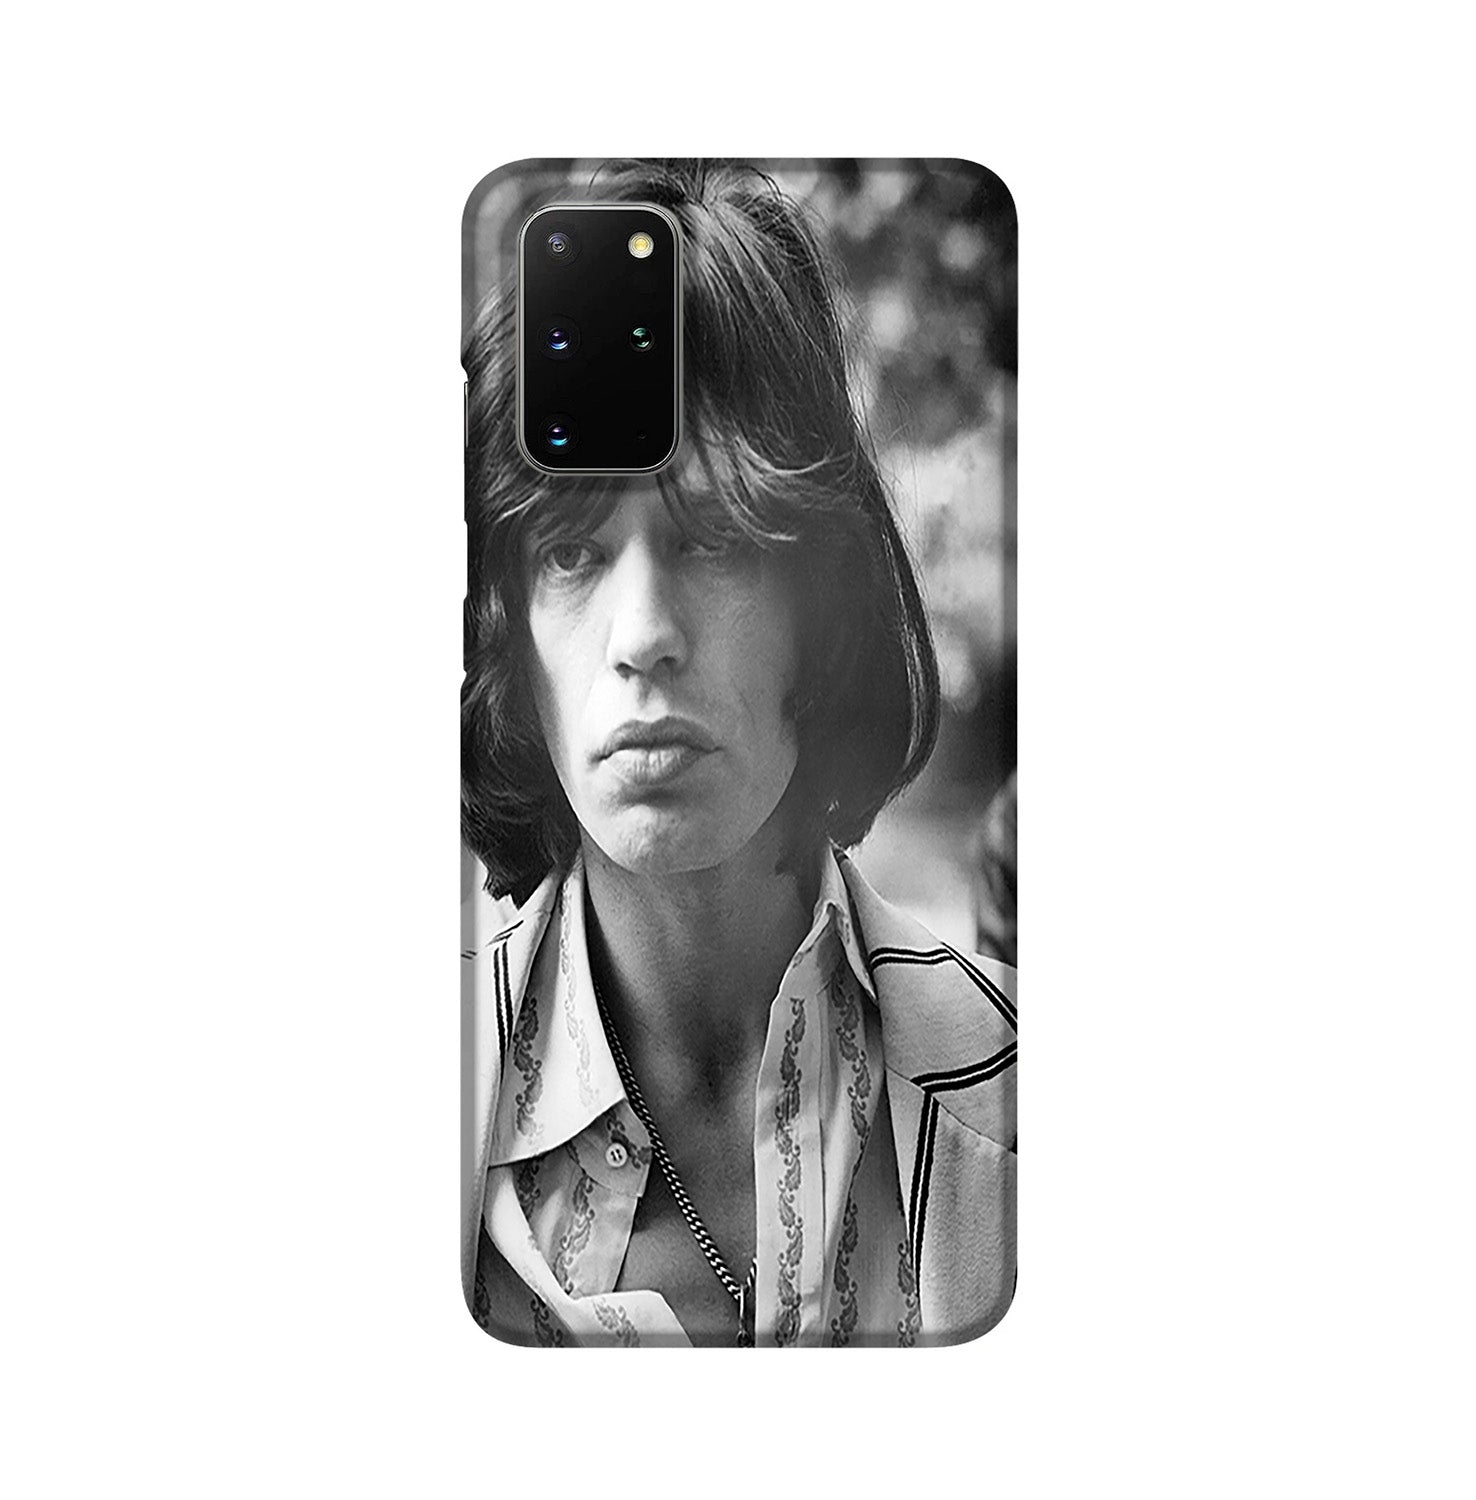 Mick Jagger in 1969 Phone Case Samsung S20 Plus